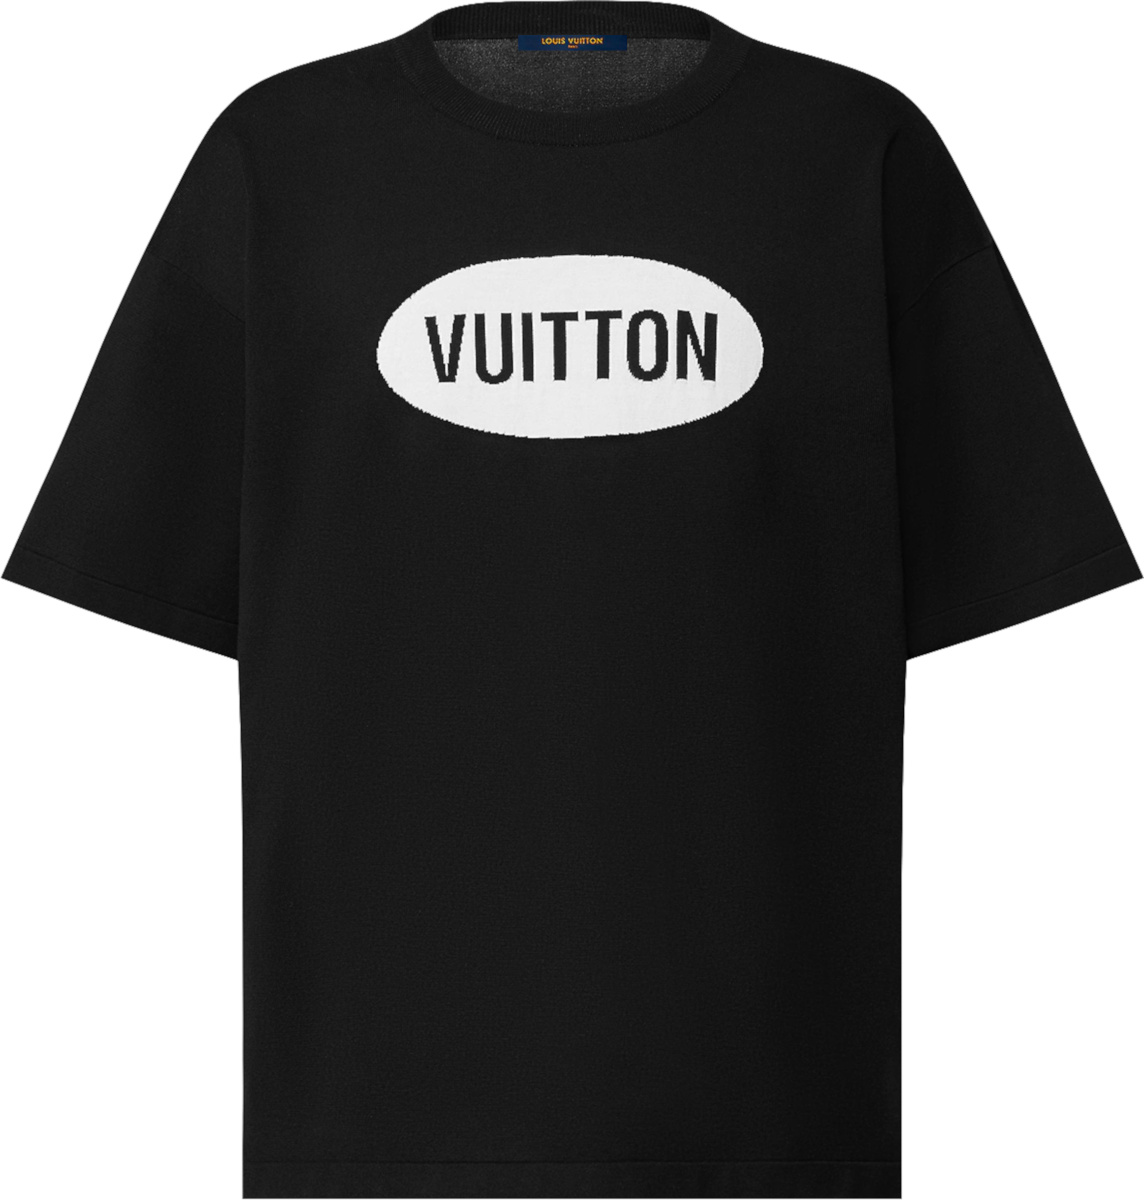 Louis Vuitton Black 'Vuitton Oval' T-Shirt | Incorporated Style